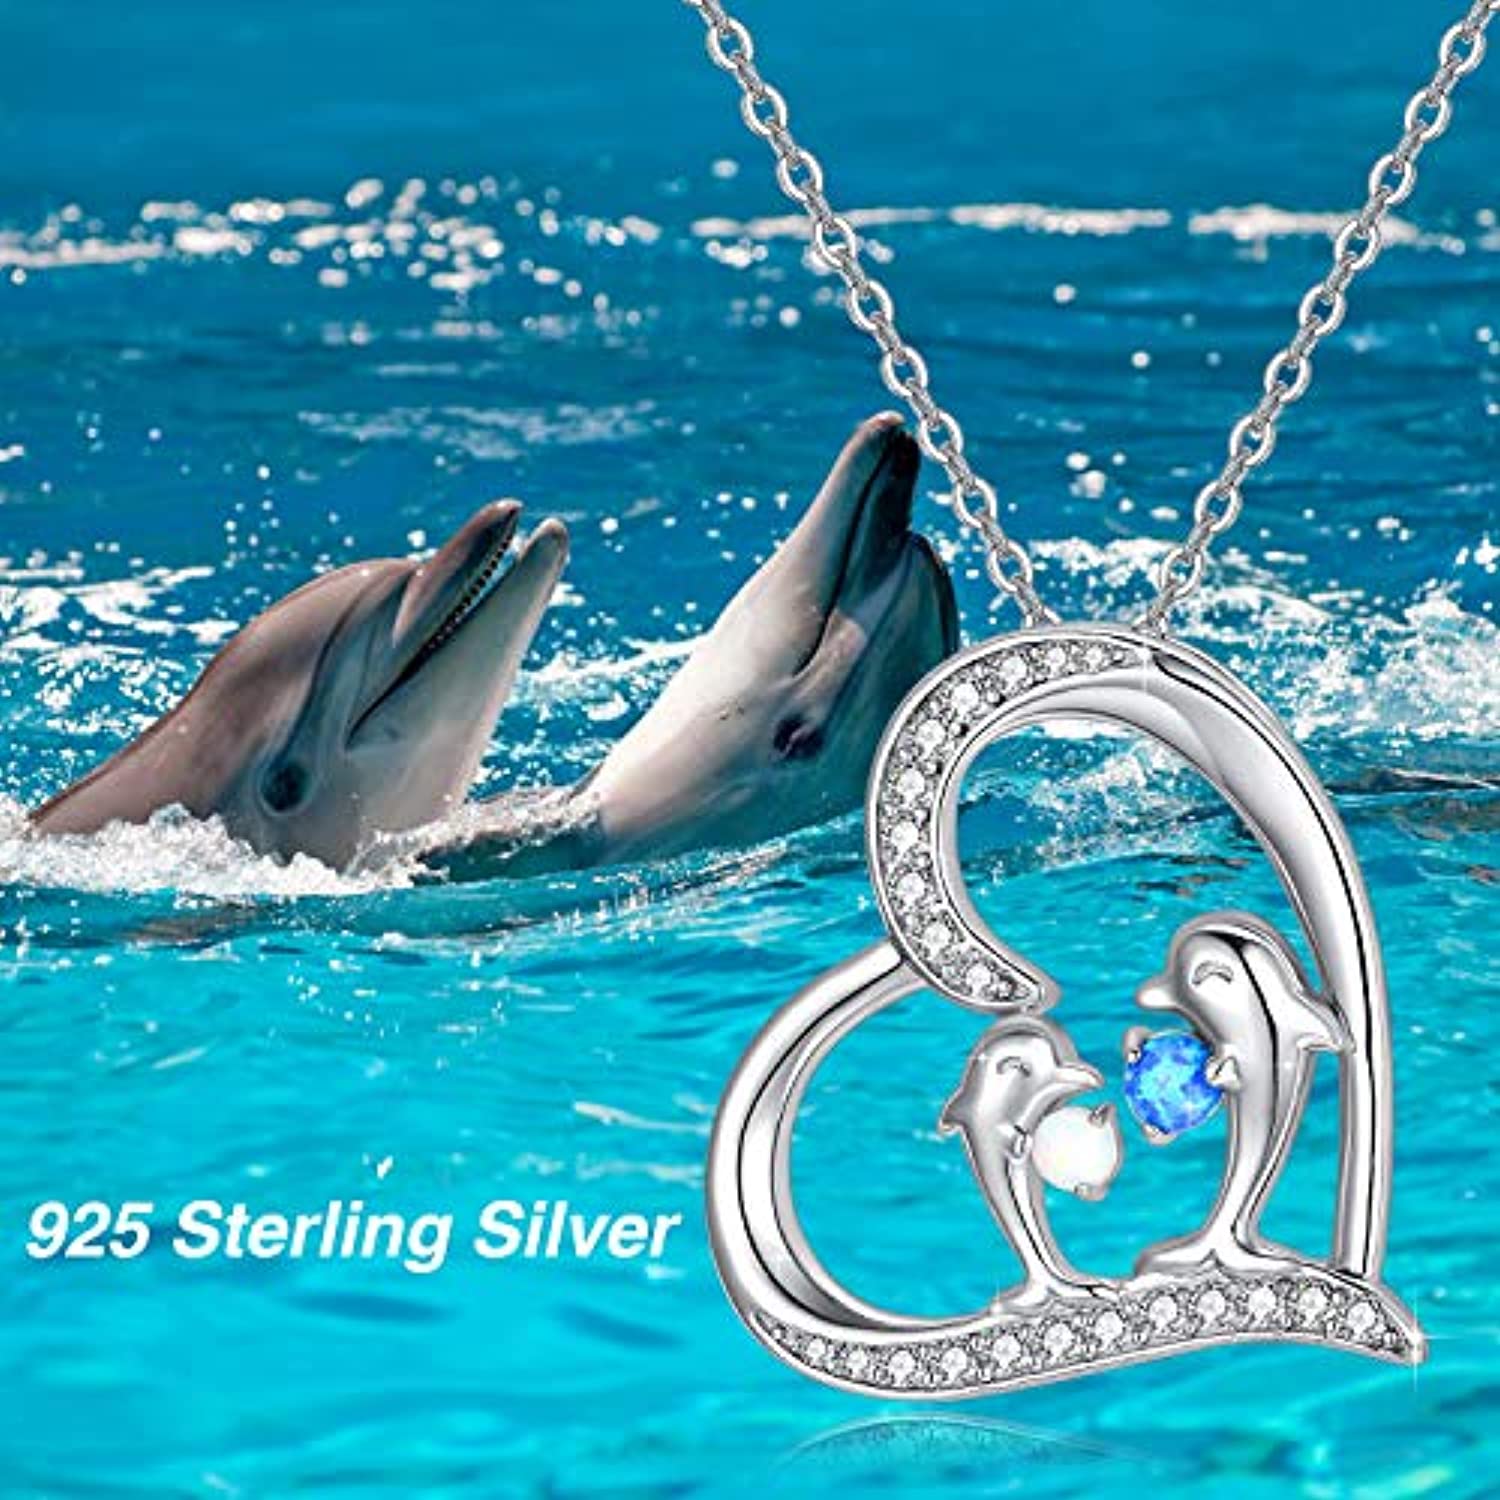 Sterling Silver Dolphin Necklace, Lovely Happy Dolphin Play Ball Love Heart Pendant with Zirconia Opal Necklace I Love You  Jewellery Gift for Women Girlfriend Mom